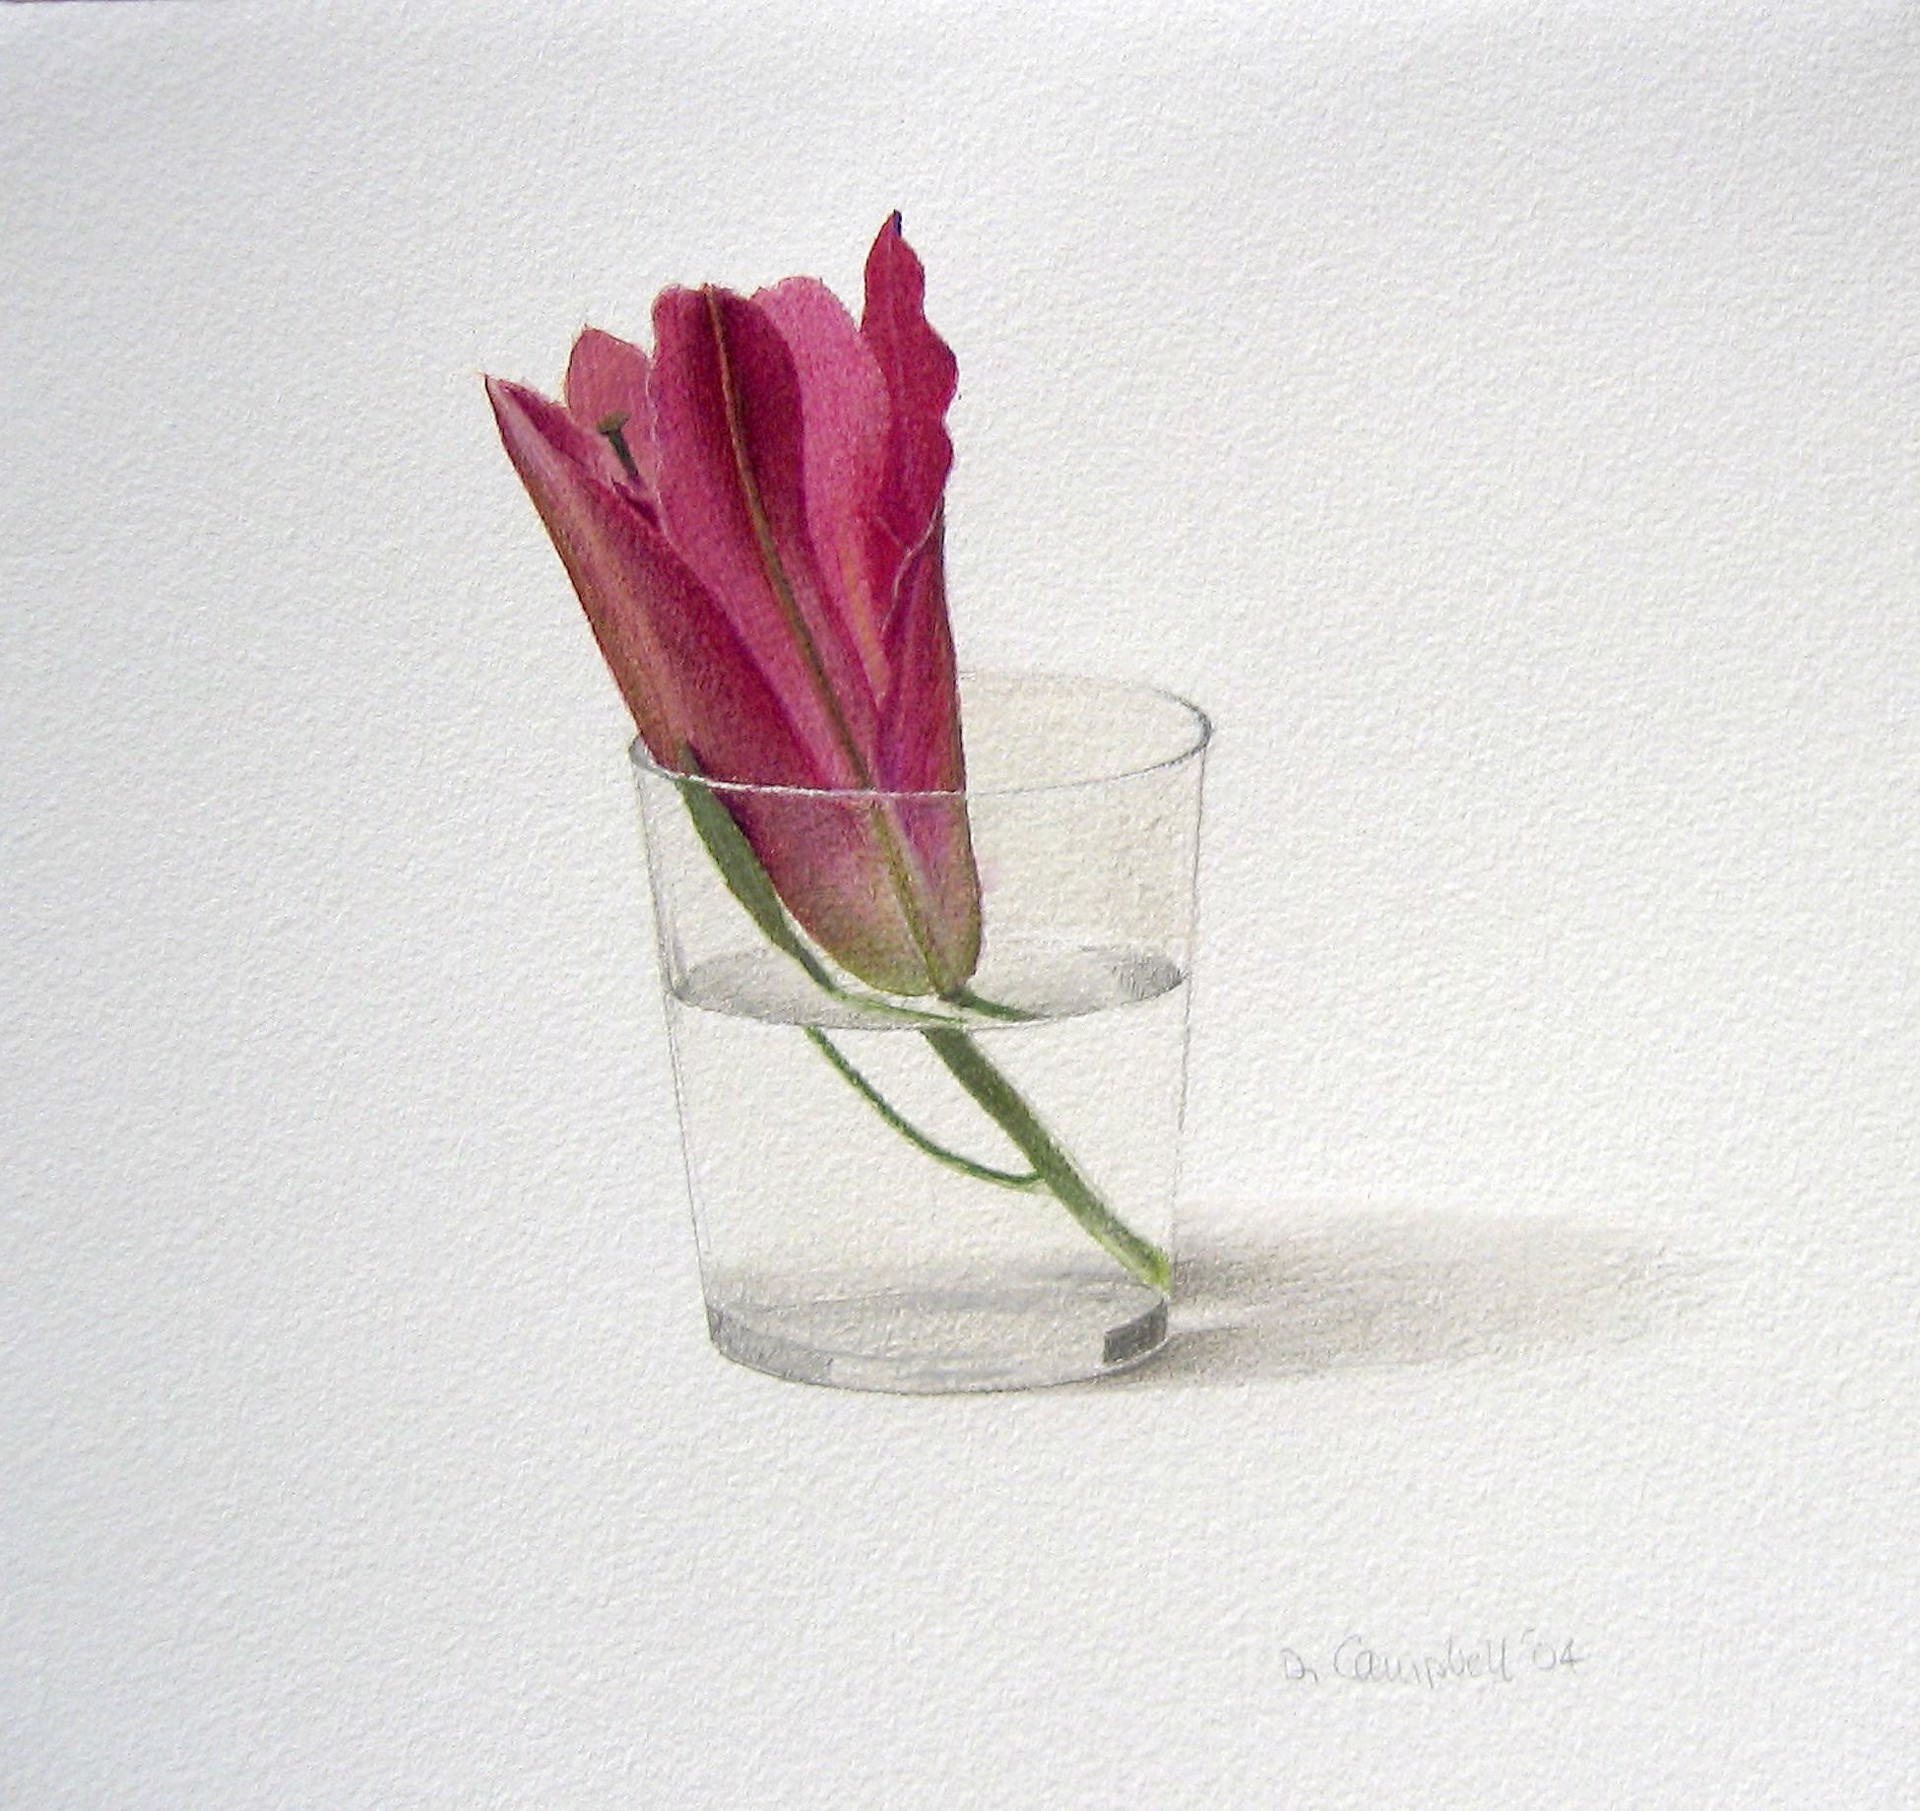 Lily in a Glass by Donald Campbell